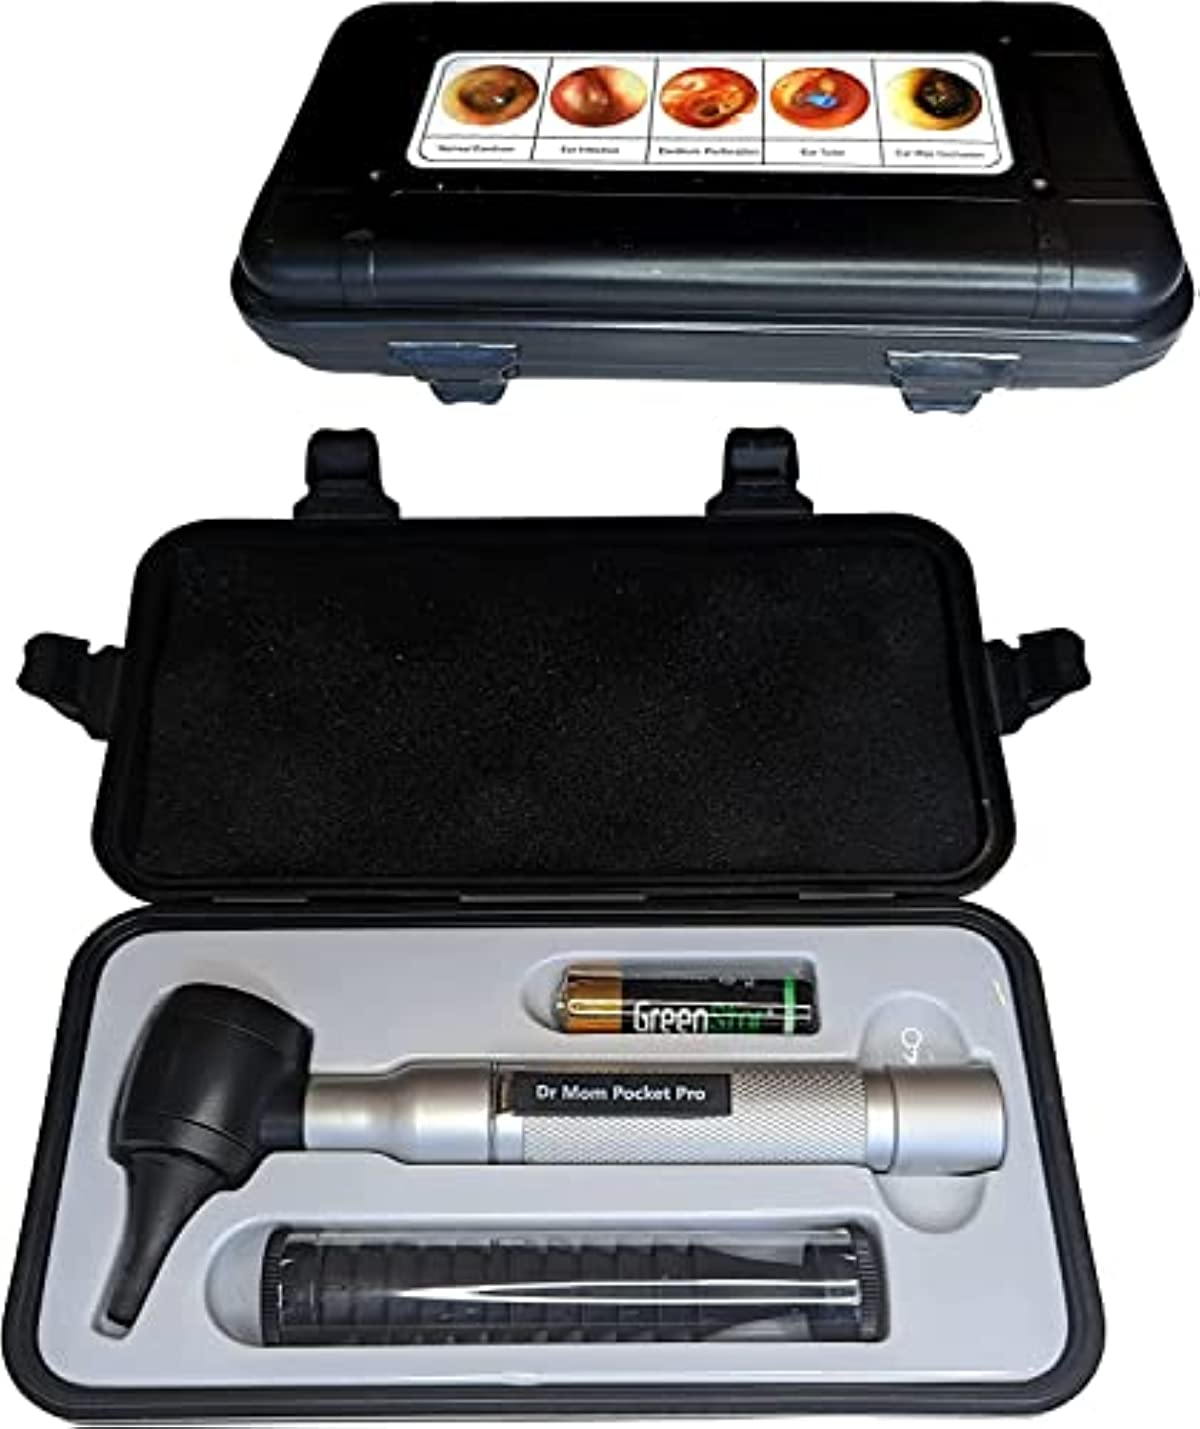 【Lifetime Warranty】4th Generation Doctor Mom LED Pocket Pro Otoscope with both Adult and Pediatric Disposable Specula Tips, Battery, and Protective Hard Plastic Case